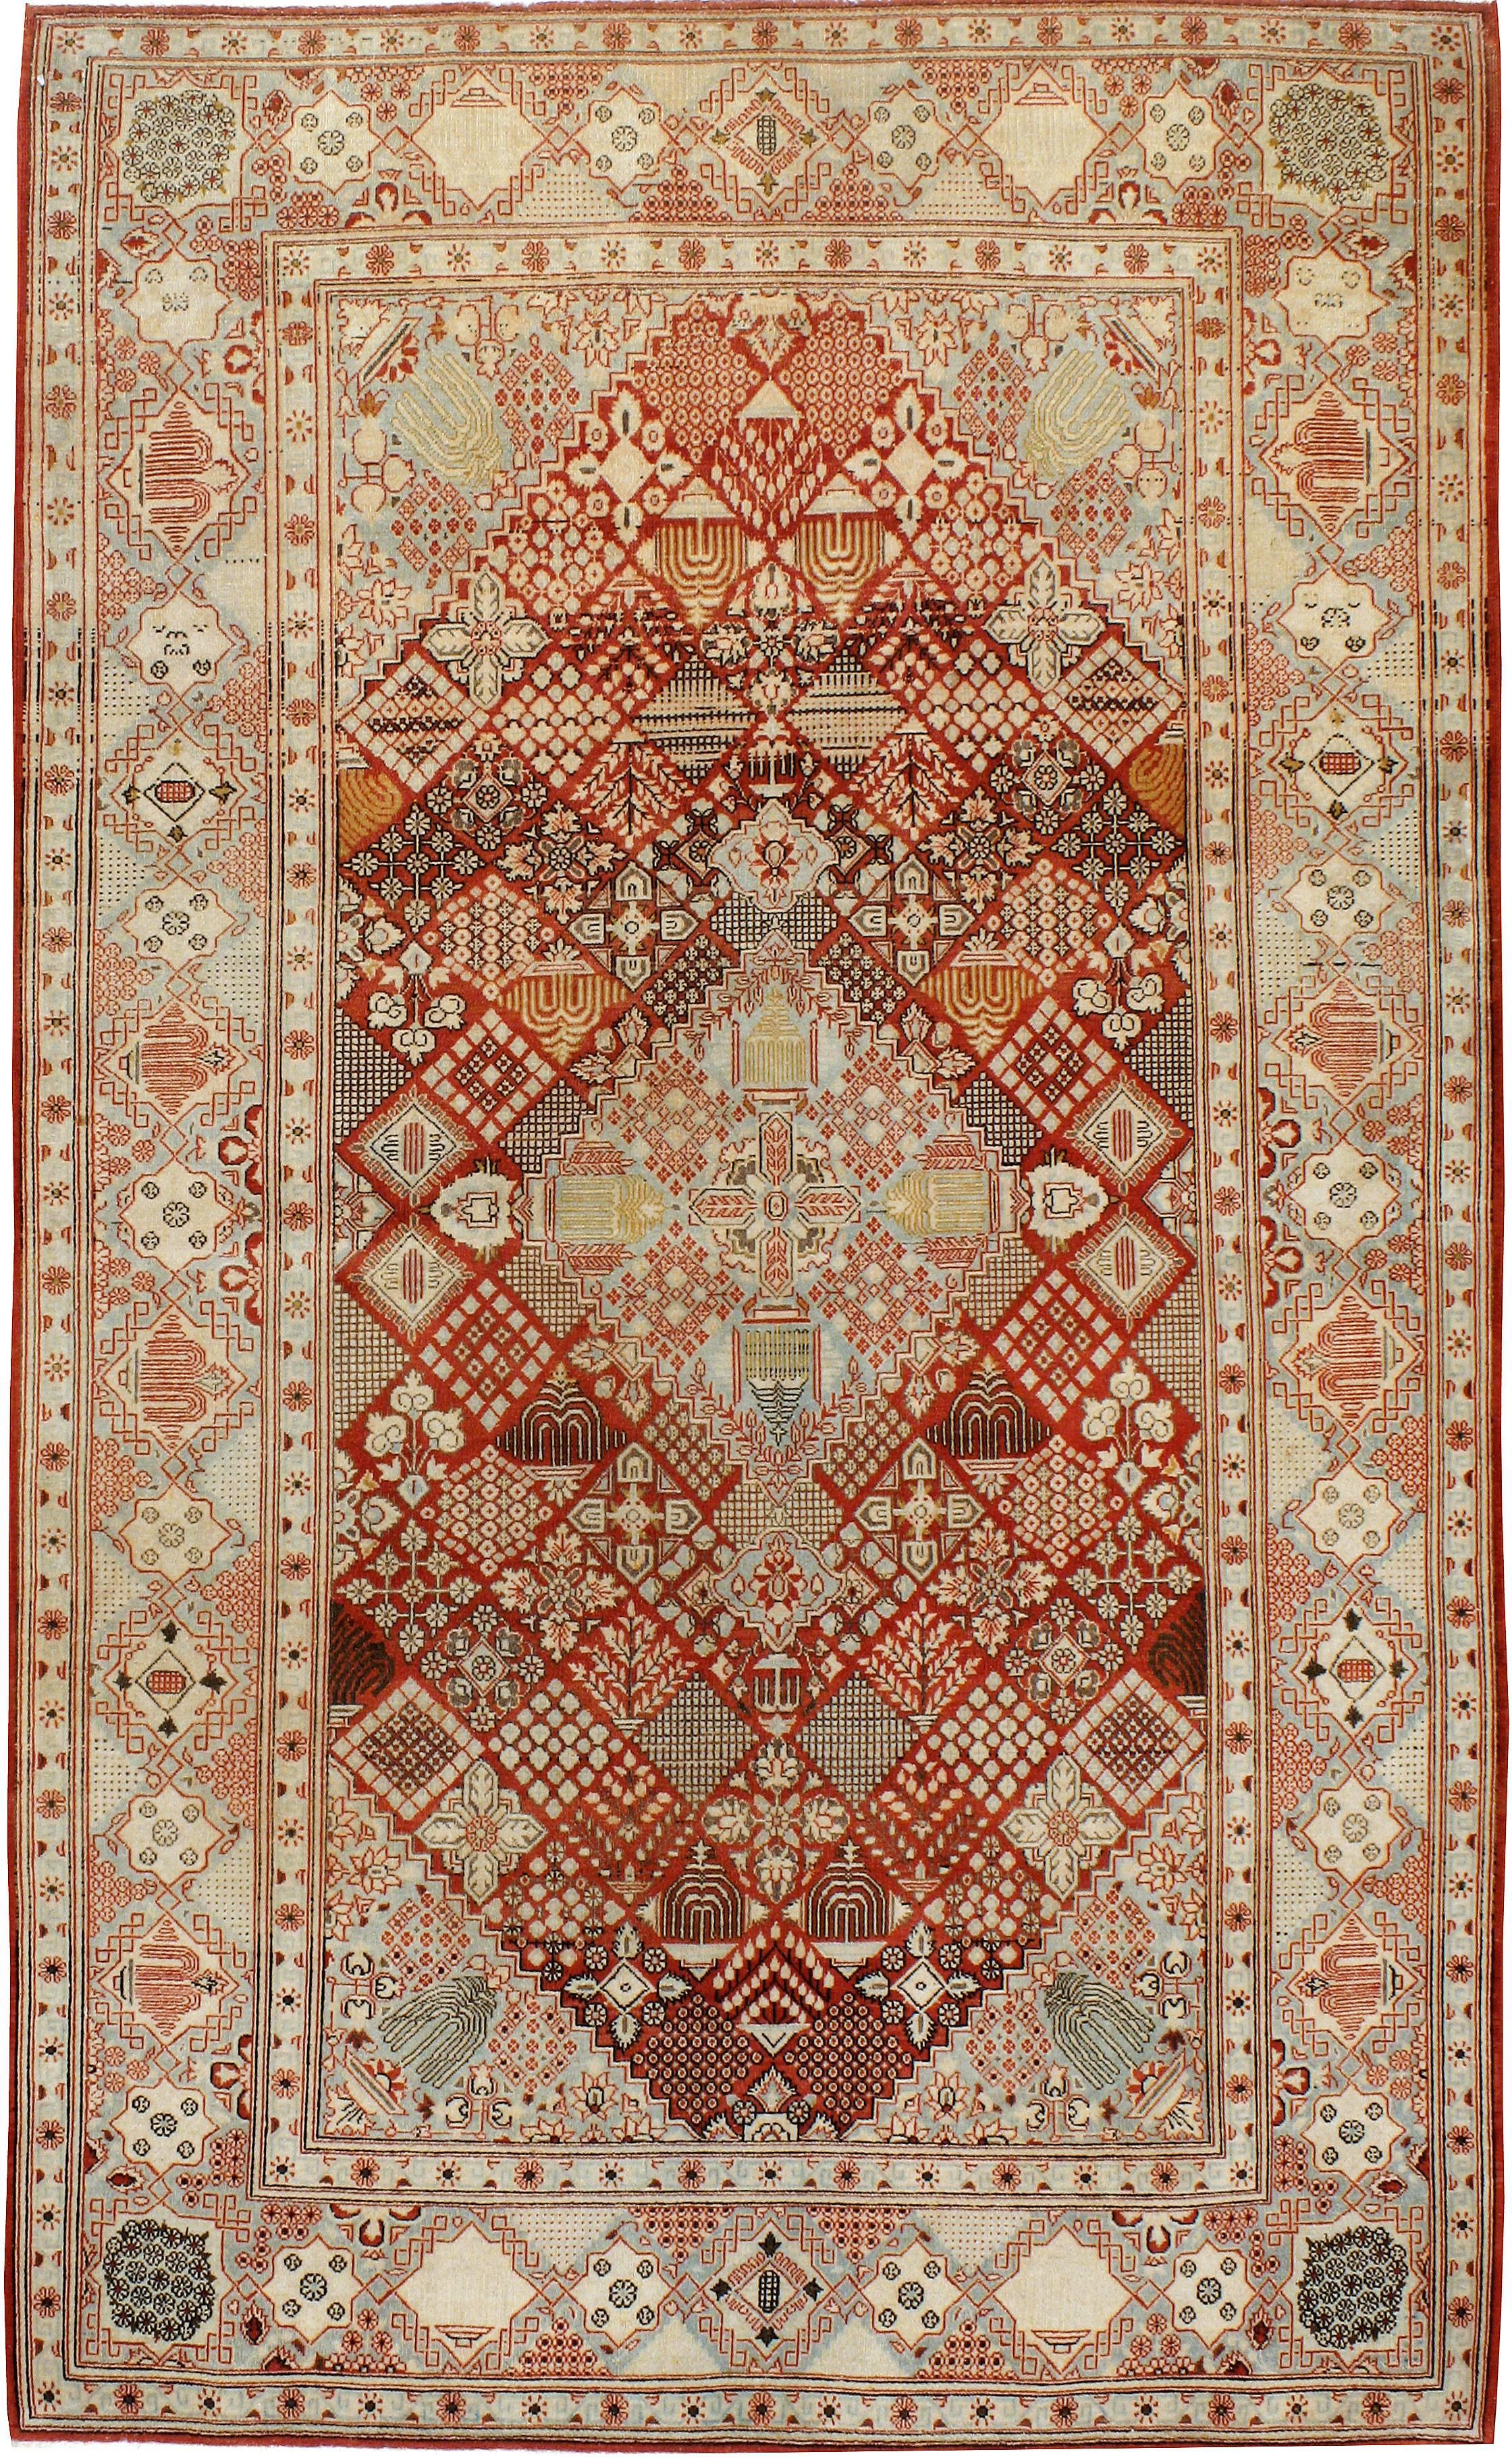 An antique Persian Kashan carpet from the second quarter of the 20th century featuring a Joshegan pattern; colors consisting of brick and slate.